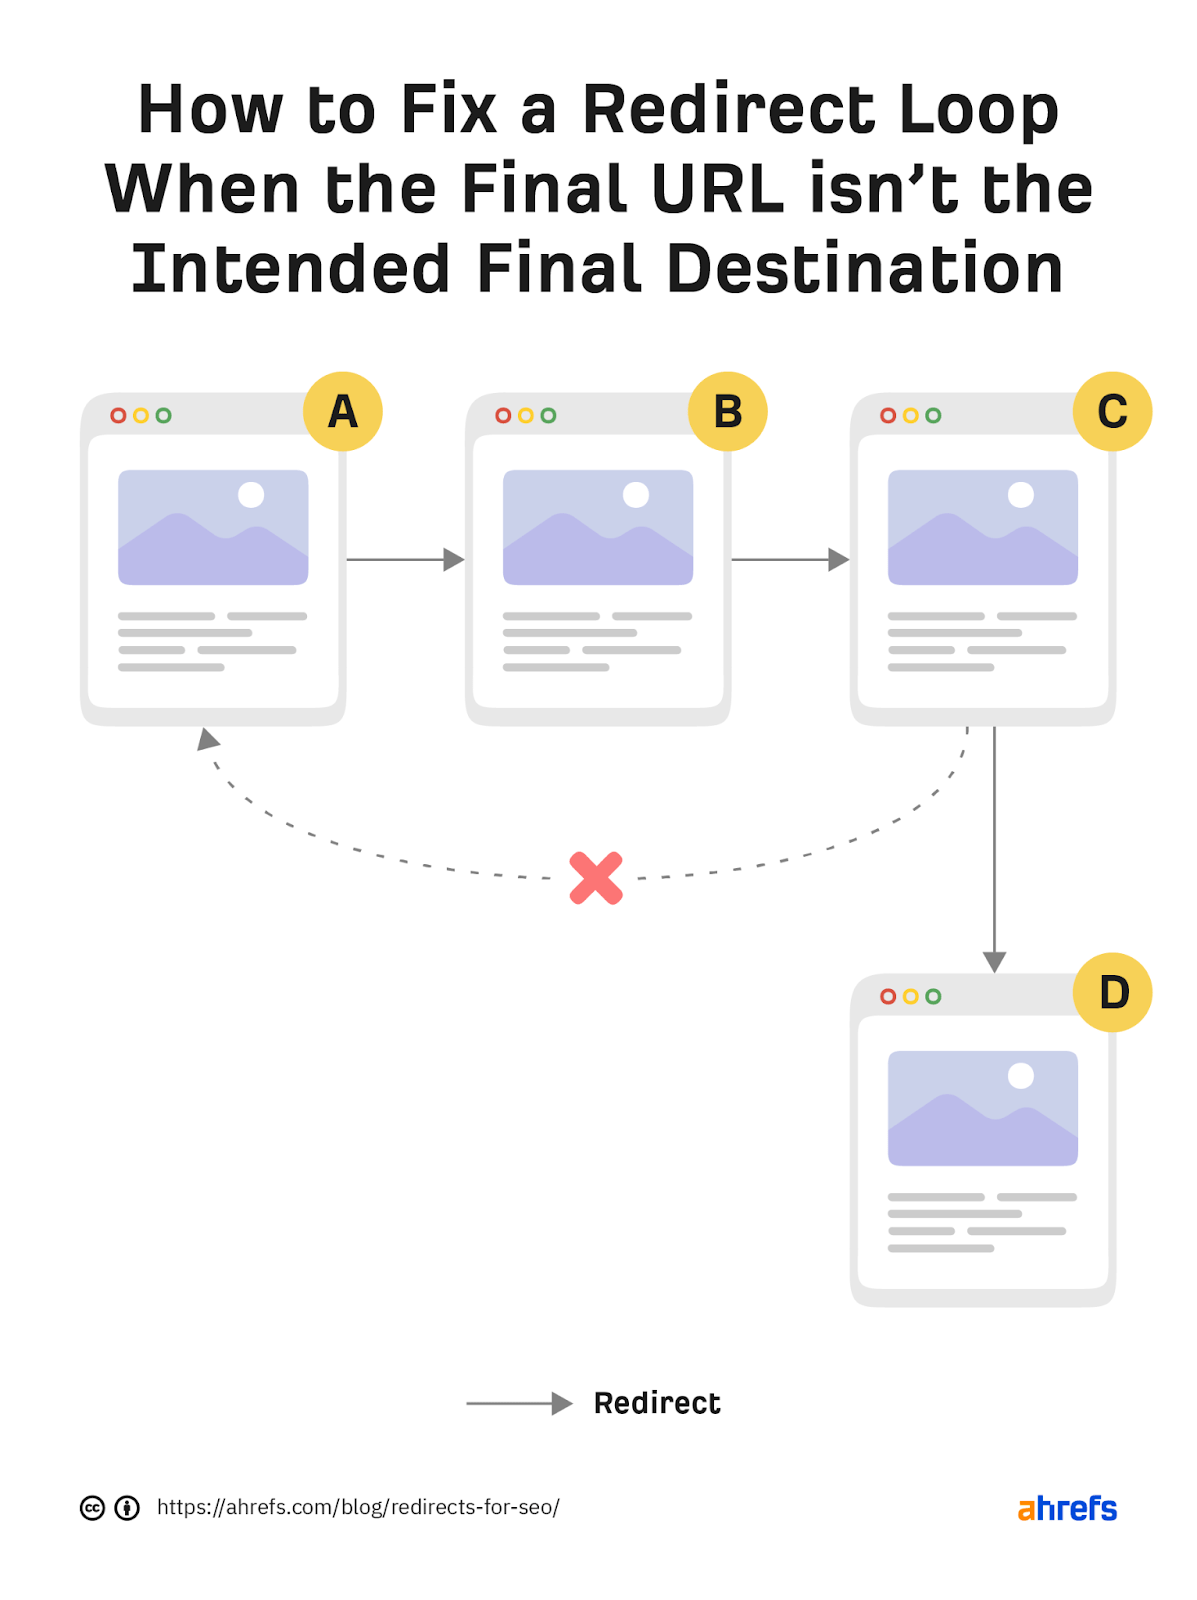 How to fix a redirect loop when the final URL isn't the intended final destination